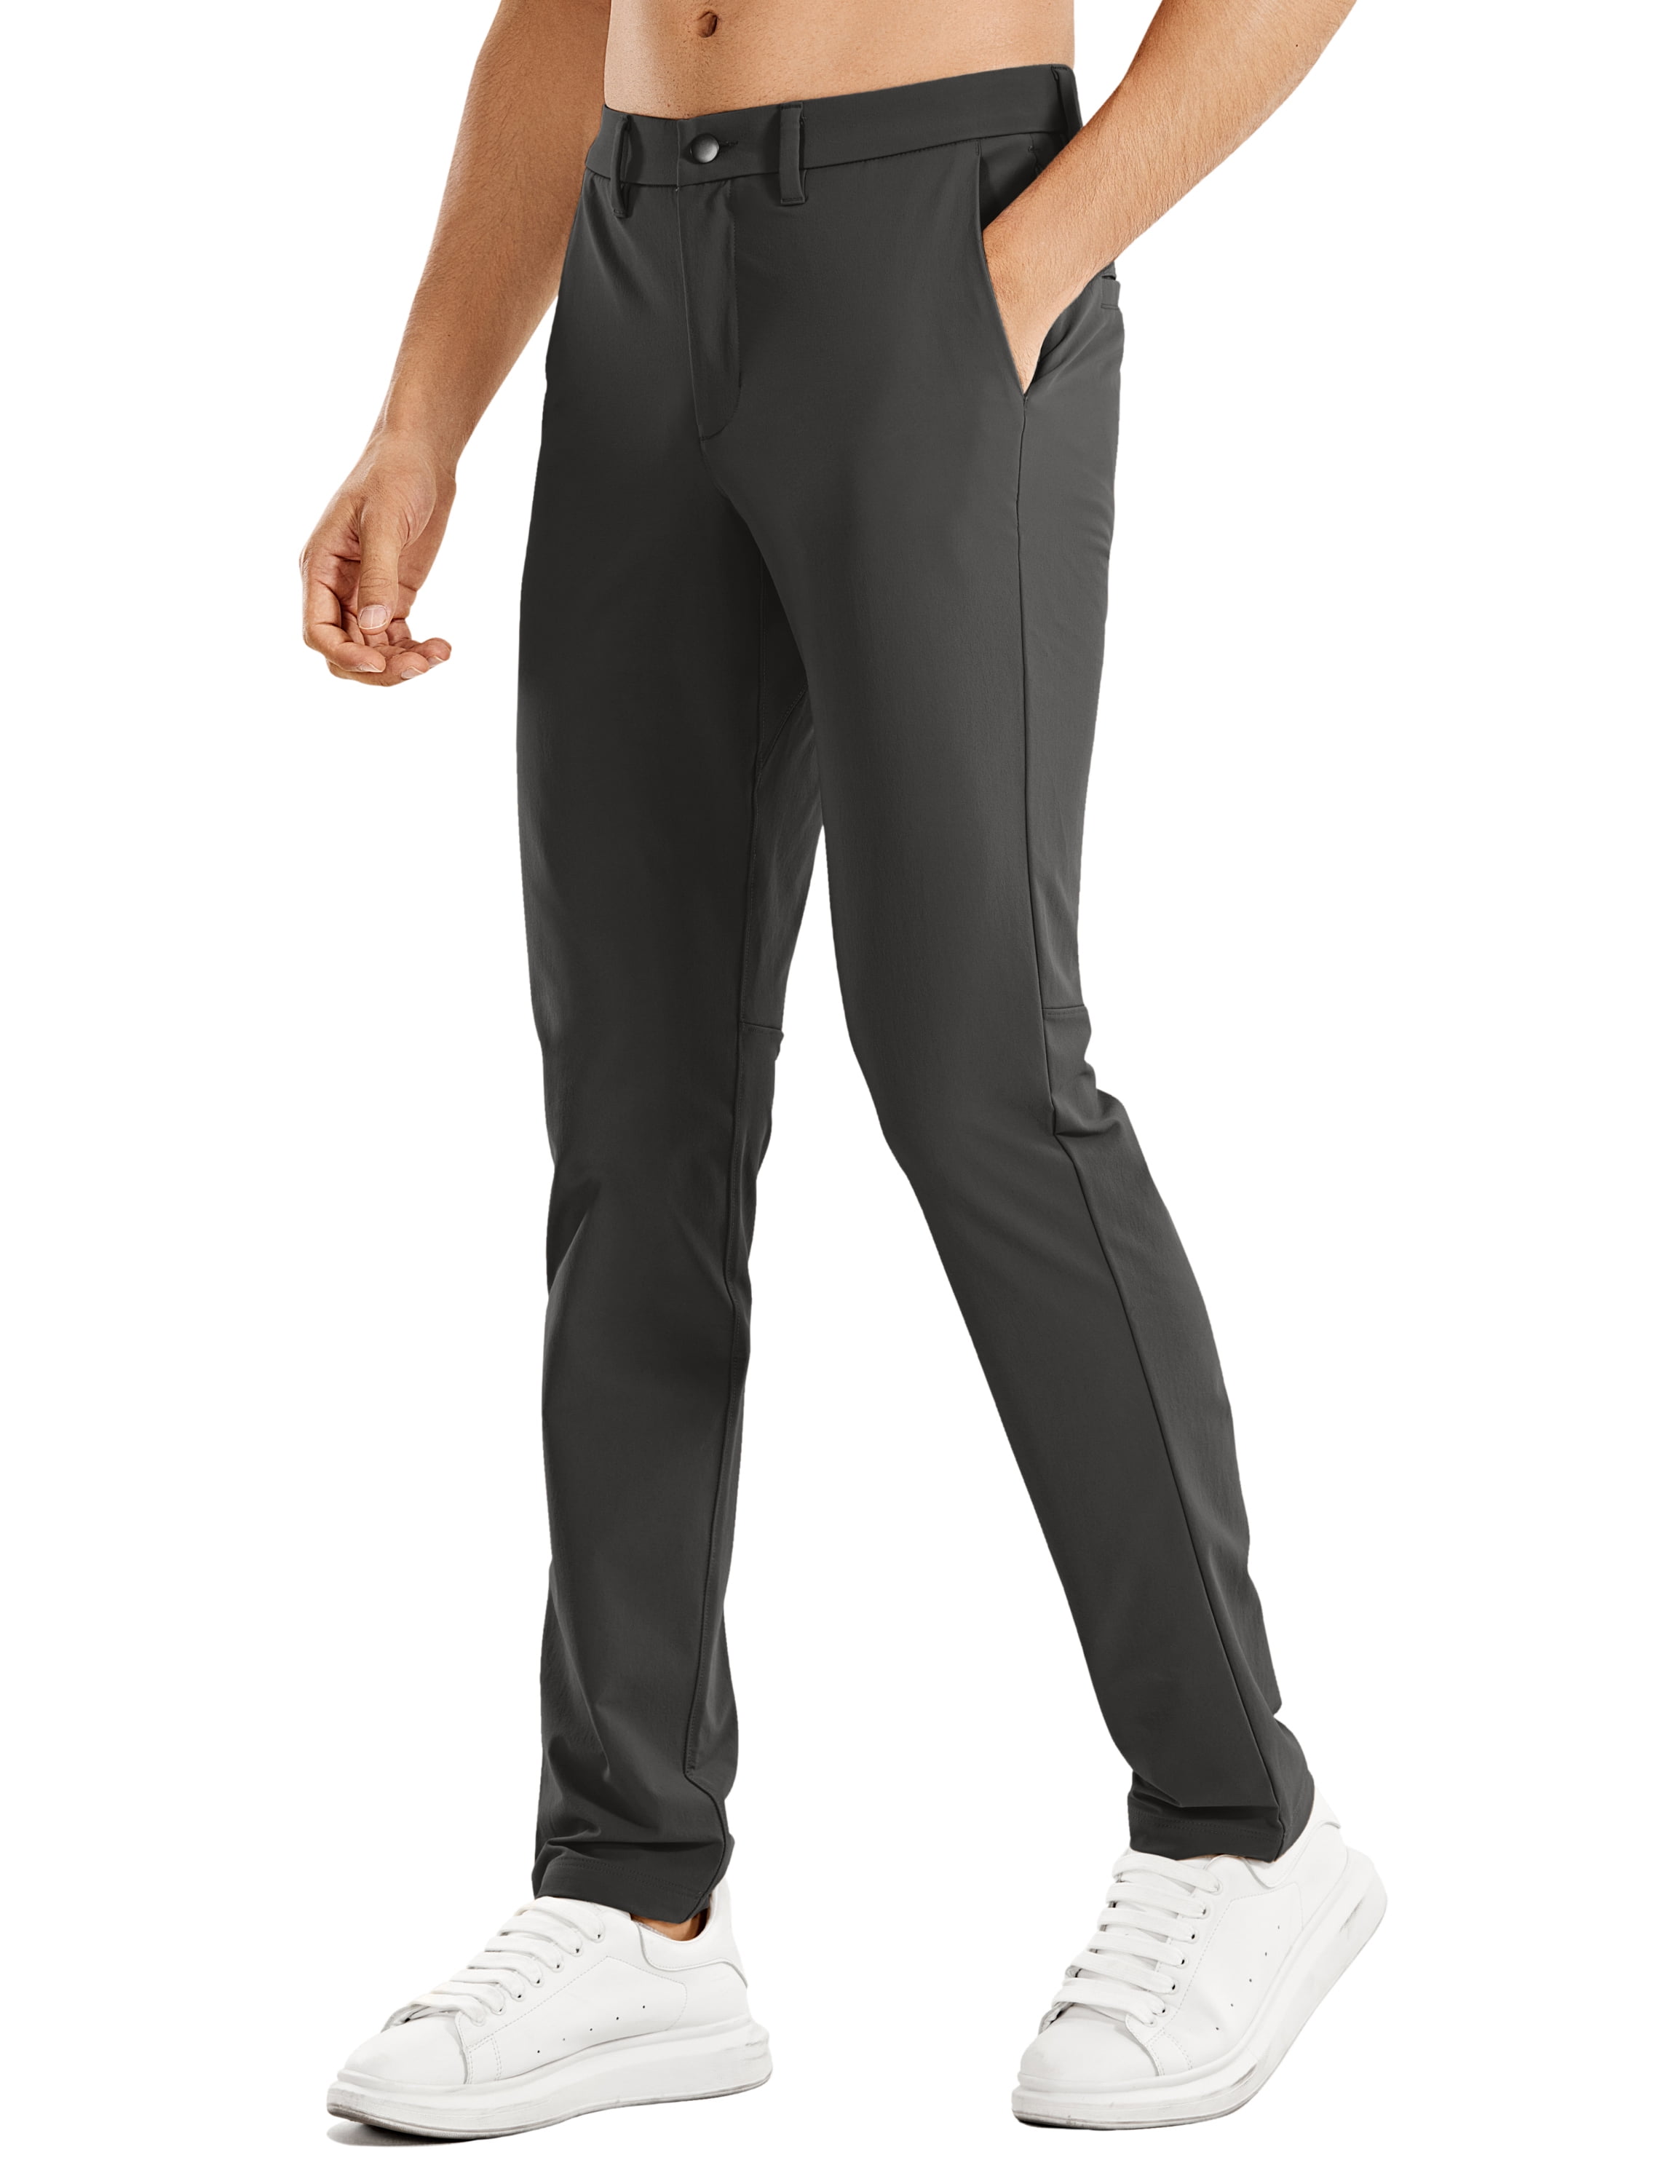 CRZ YOGA Men's Lightweight Jogger Pants 28''/30''/32'' Elastic Stretchy Pants with Side Pockets 